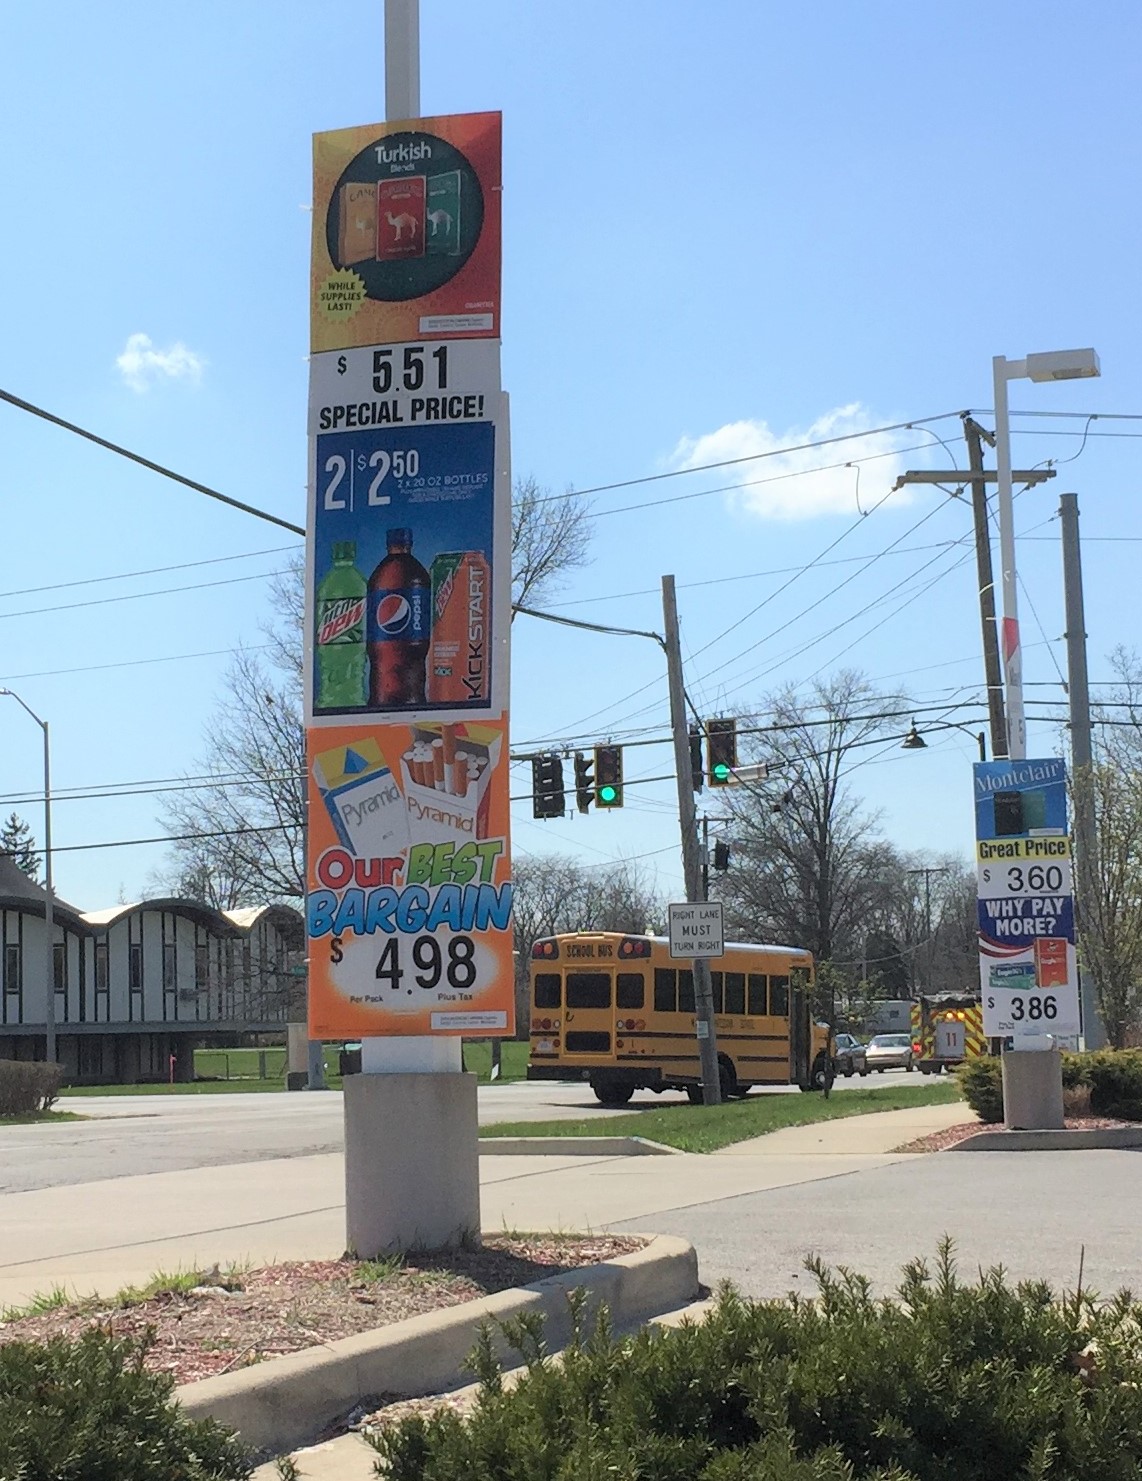 cigarette ads on a lightpole next to the road on a school bus route